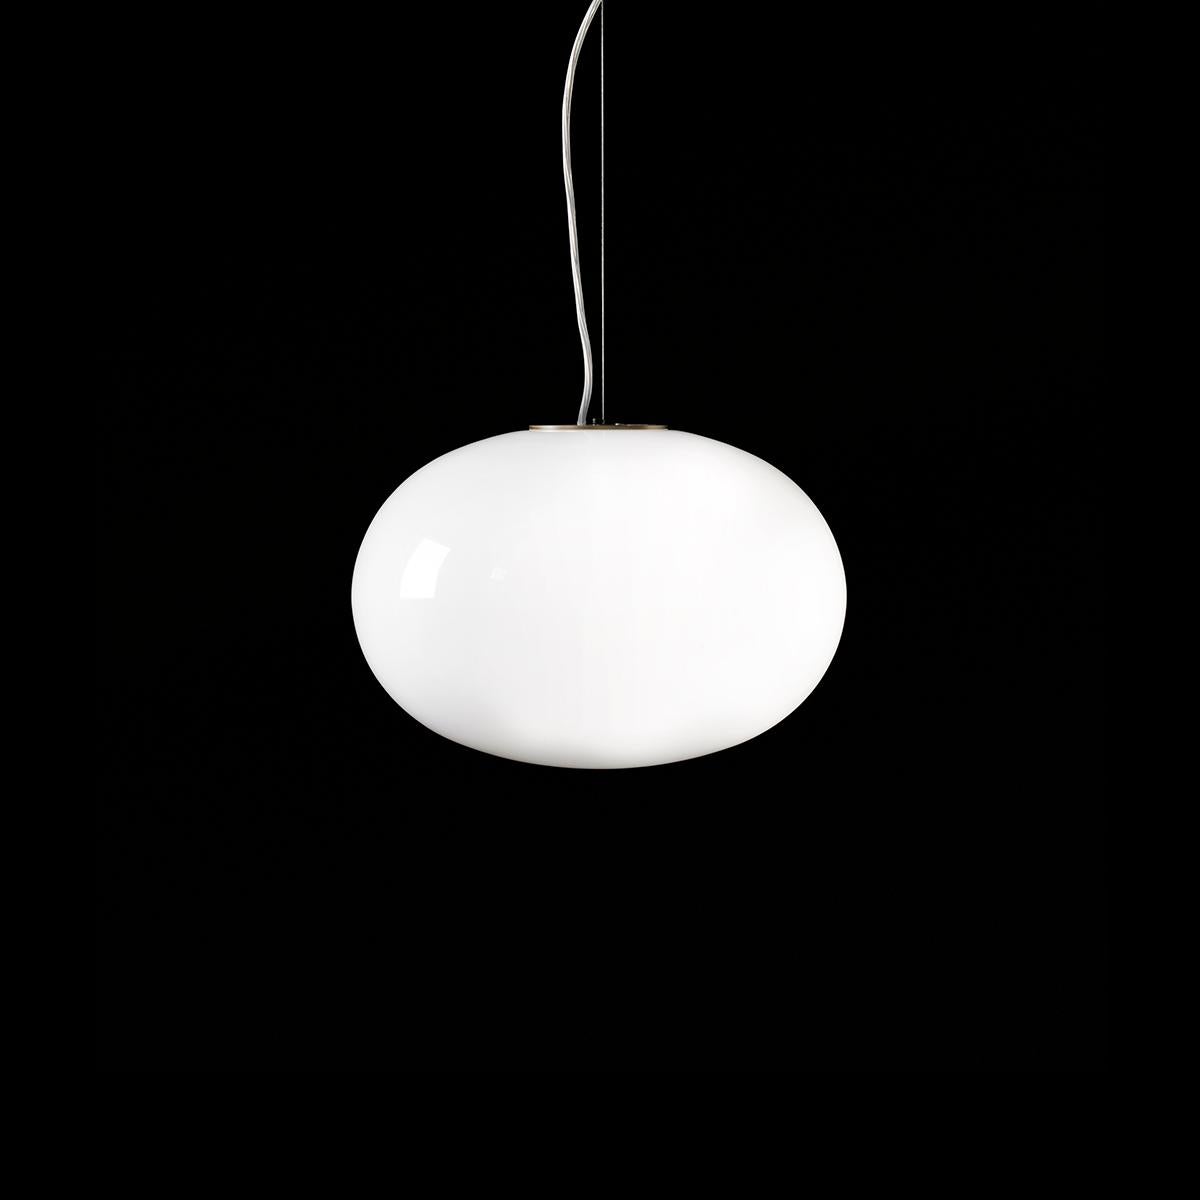 Suspension lamp 'Alba' designed by Mariana Pellegrino Soto in 2017.
Suspension lamp giving diffused light in polished opaline blown-glass. Satin brass finish structure. Manufactured by Oluce, Italy.

The concept of Alba starts with a very simple